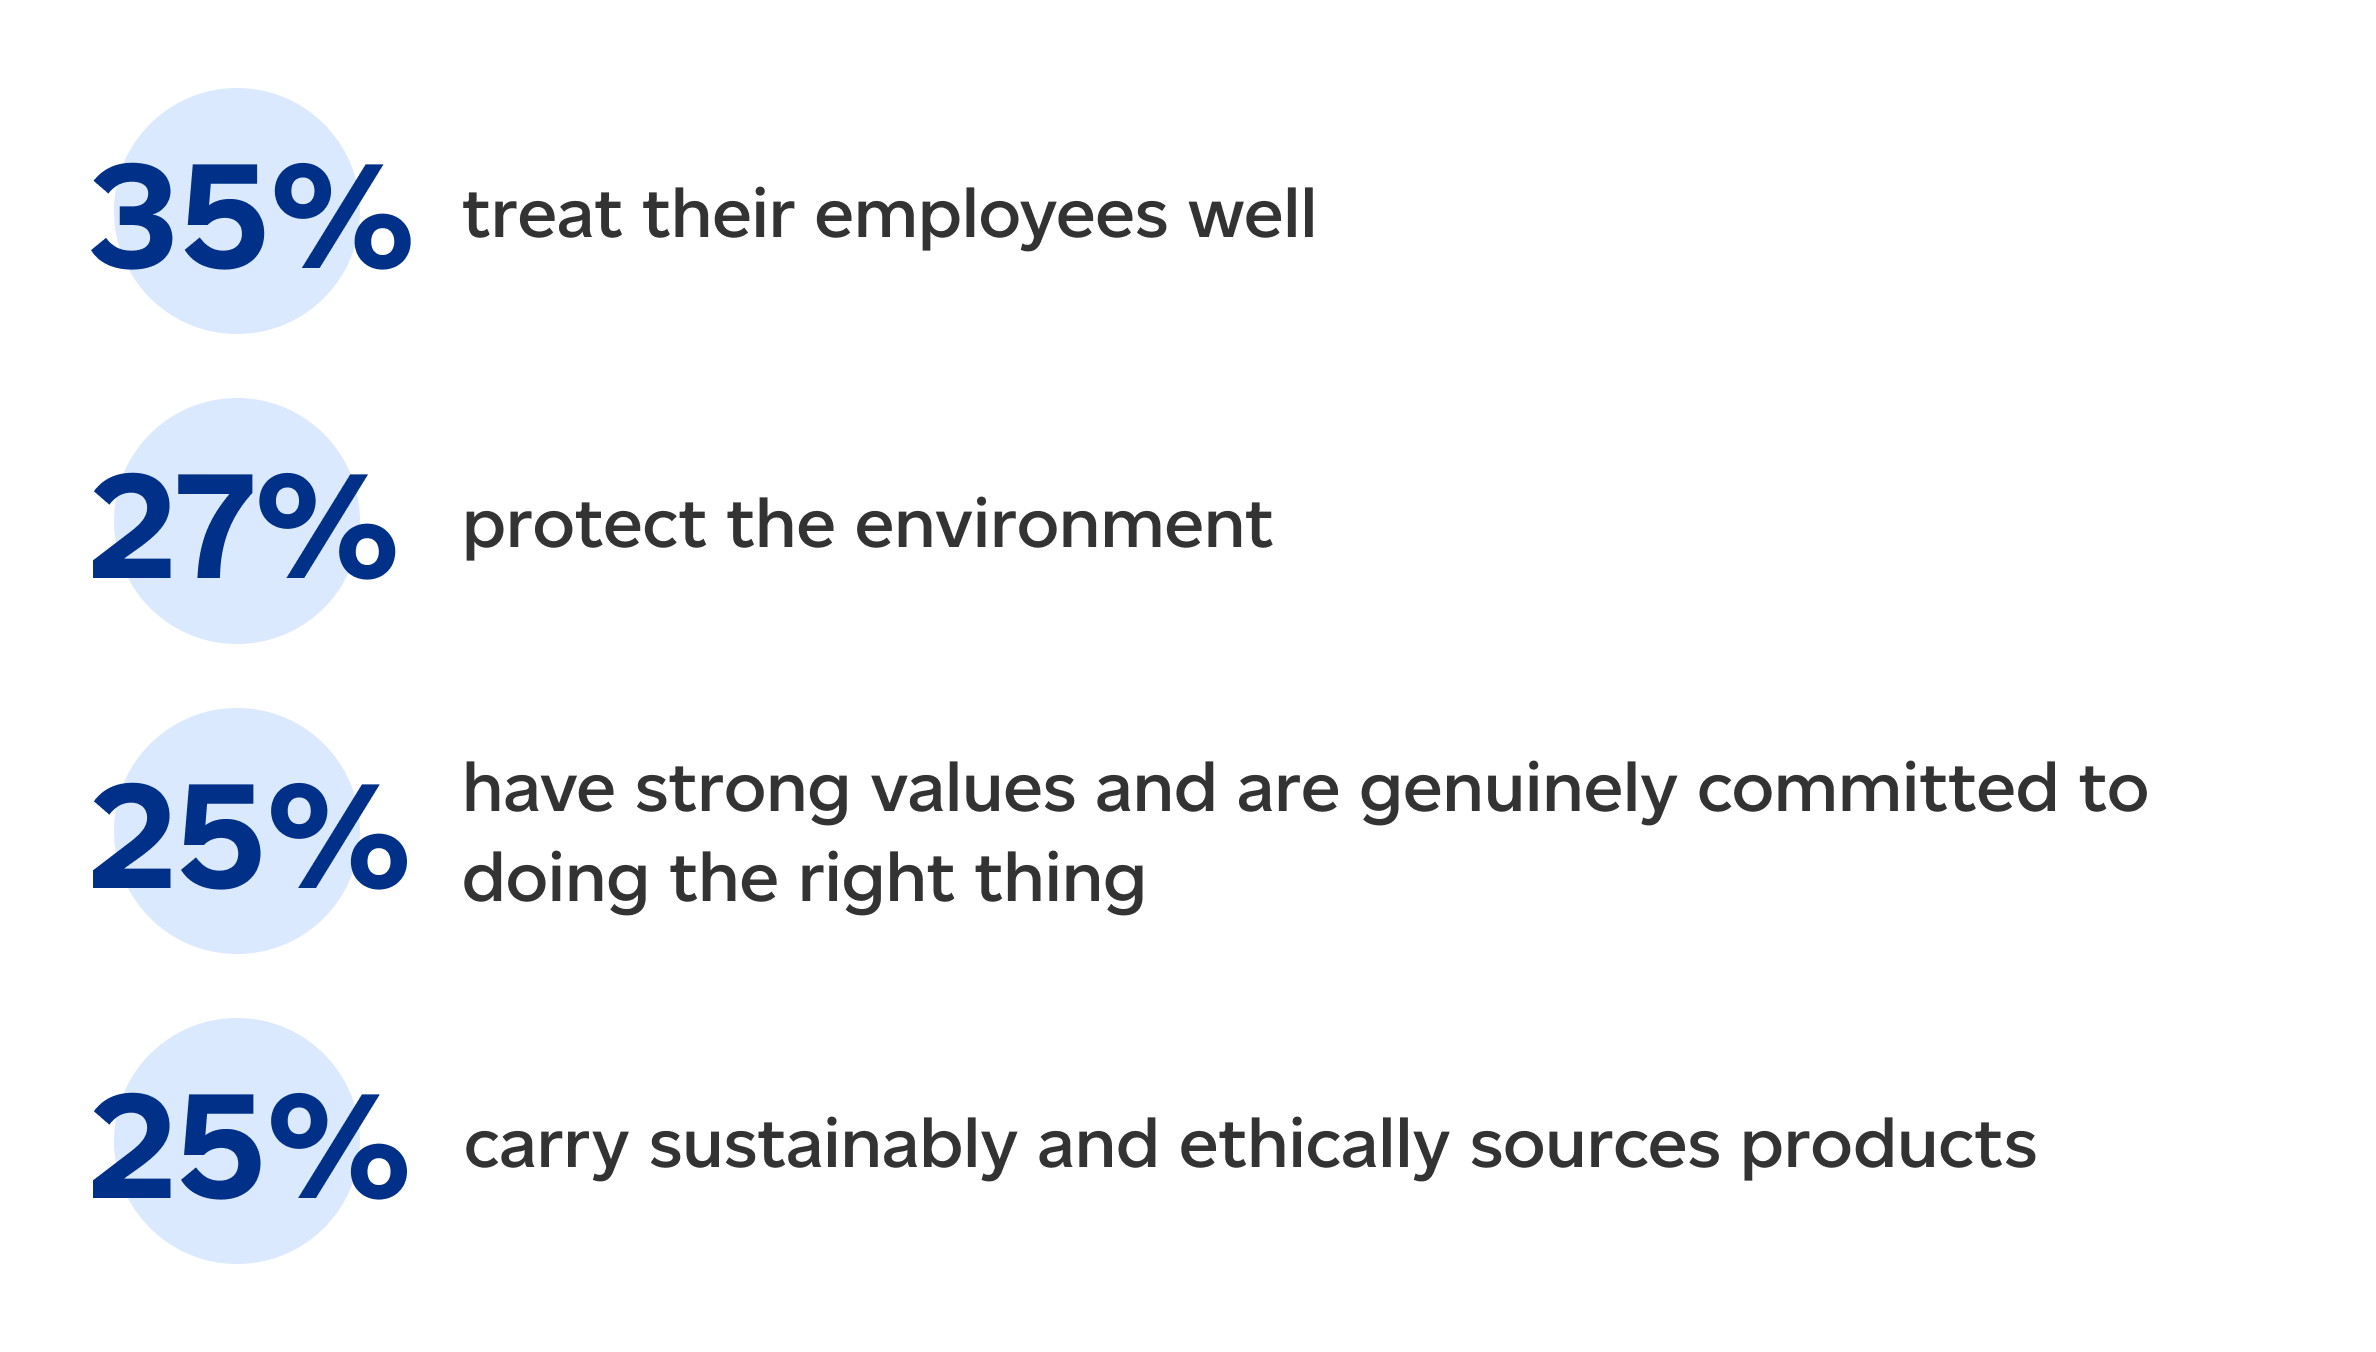 35% treat their employees well. 27% protect the environment. 25% have strong values and are genuinely committed to doing the right thing. 25% carry sustainably and ethically sources products.